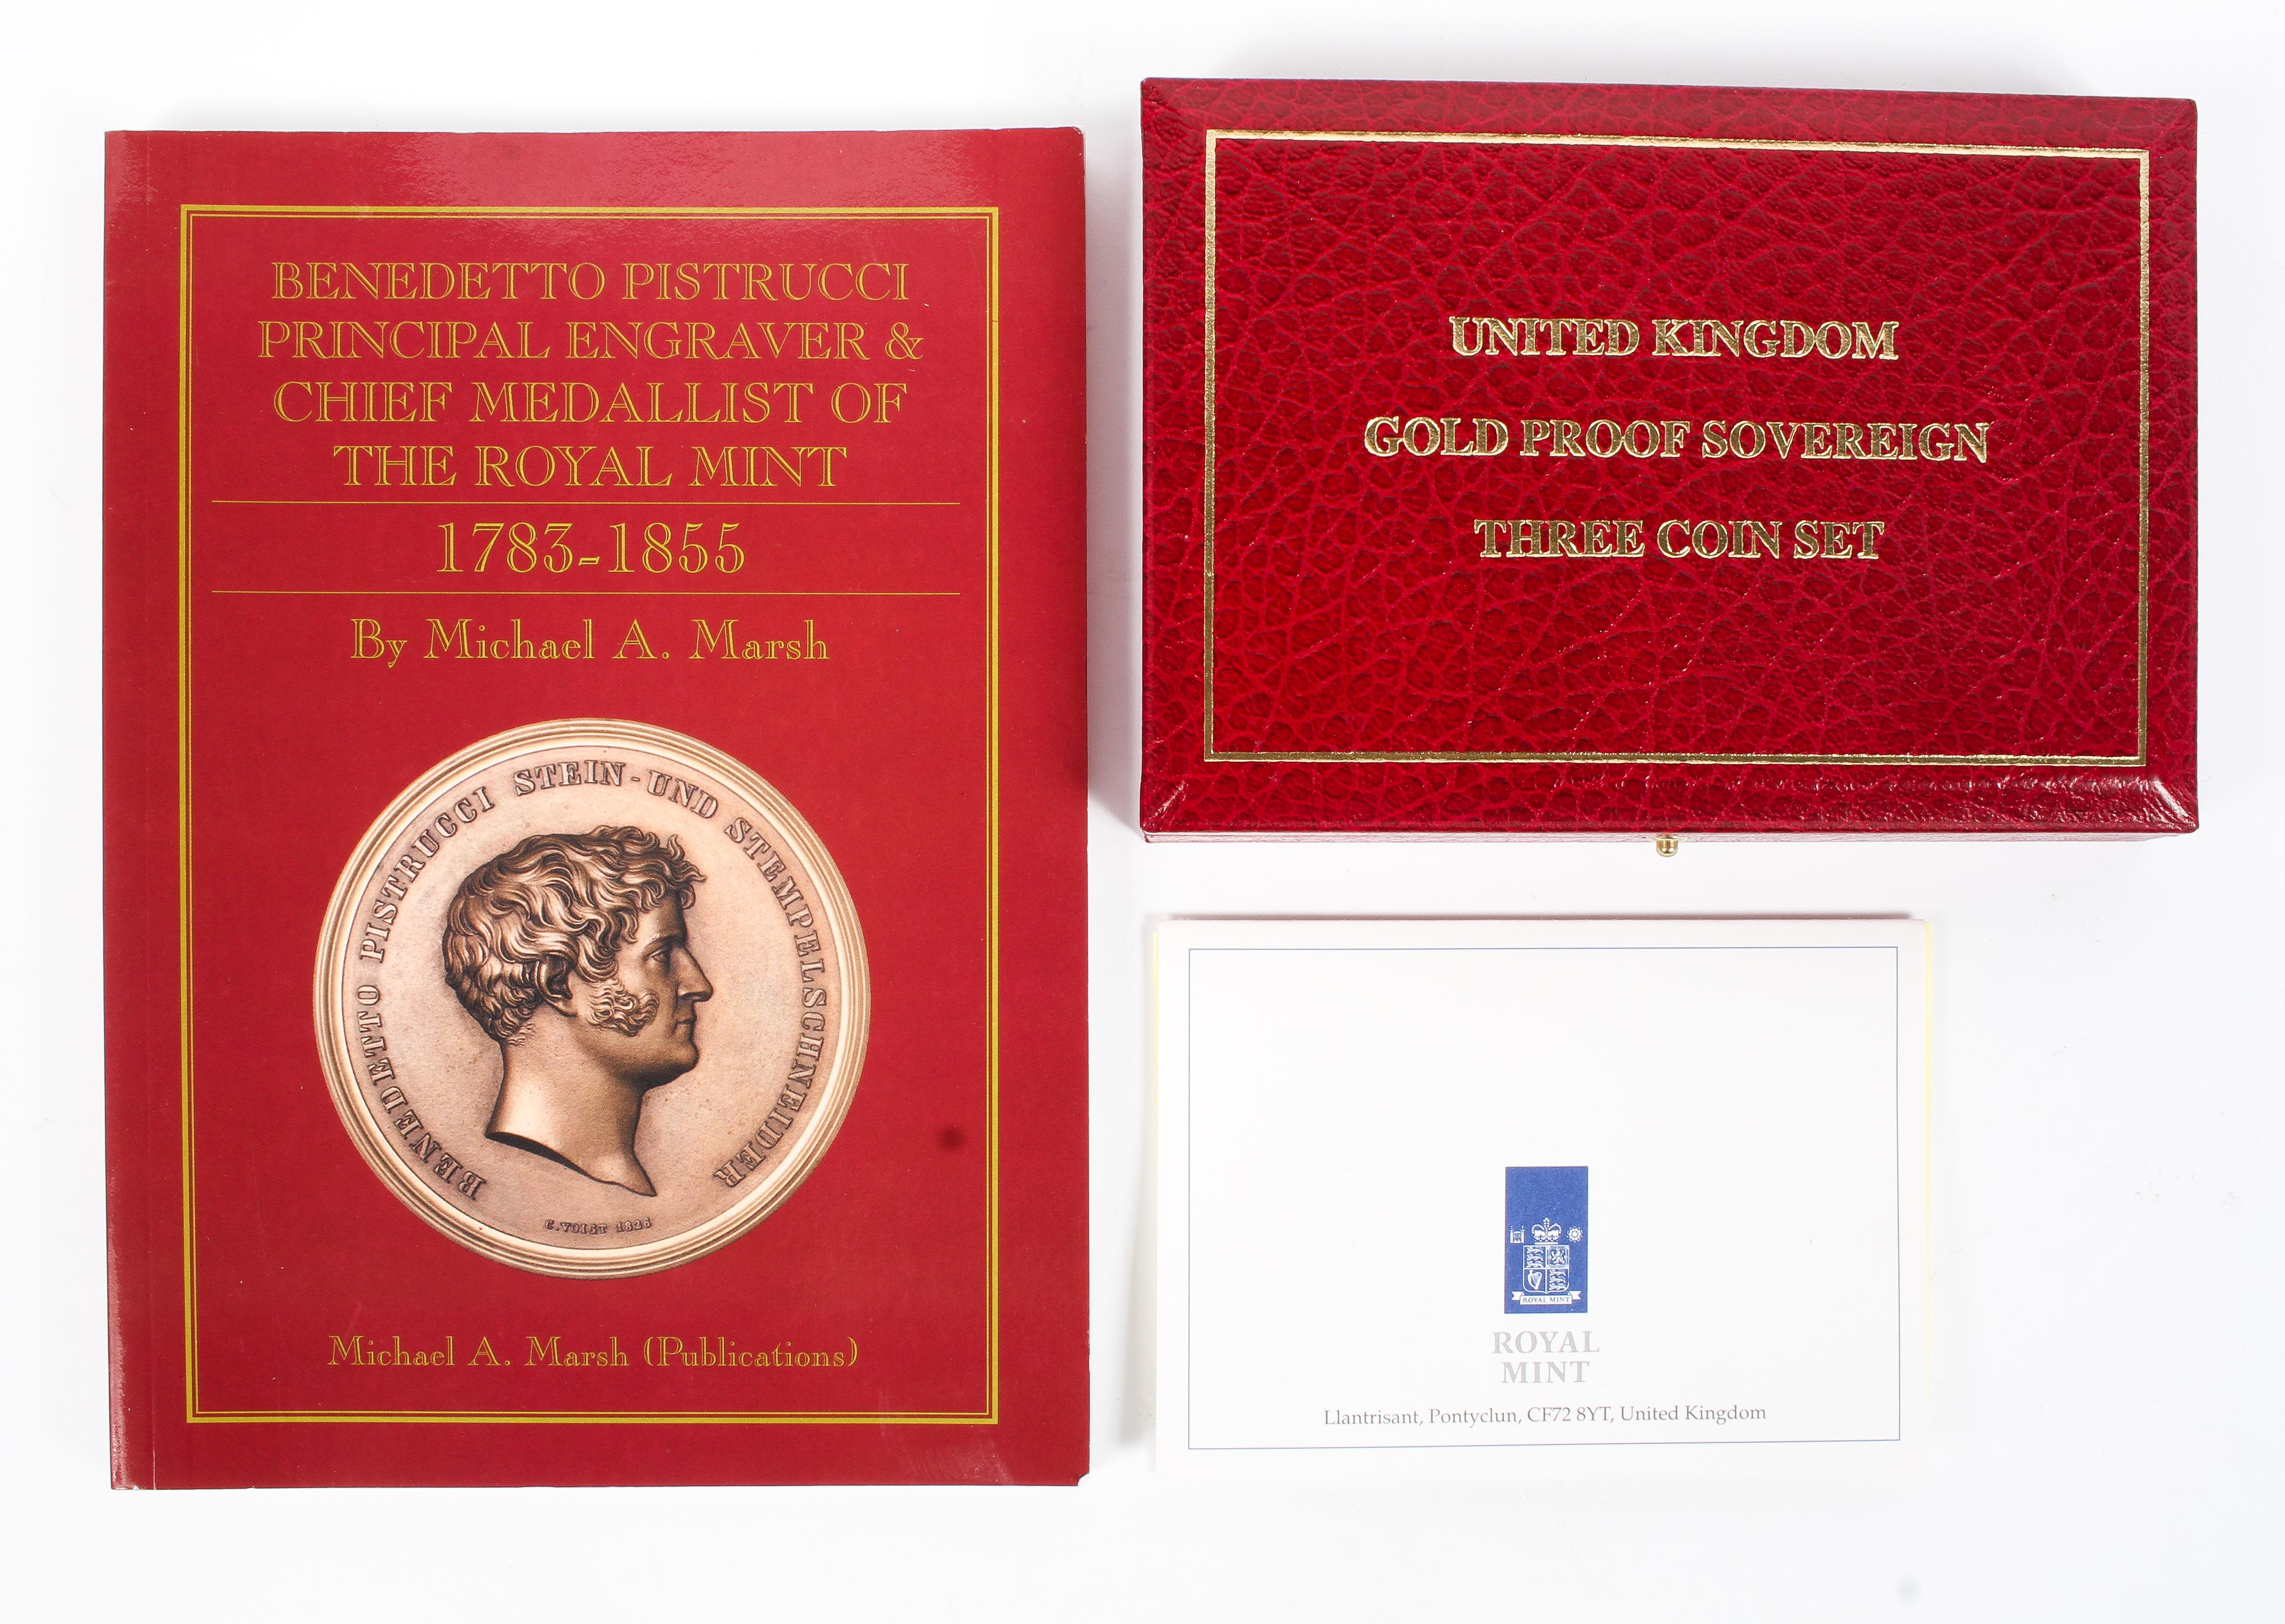 A United Kingdom 1998 gold proof three coin sovereign set issued by the Royal Mint. - Image 2 of 2